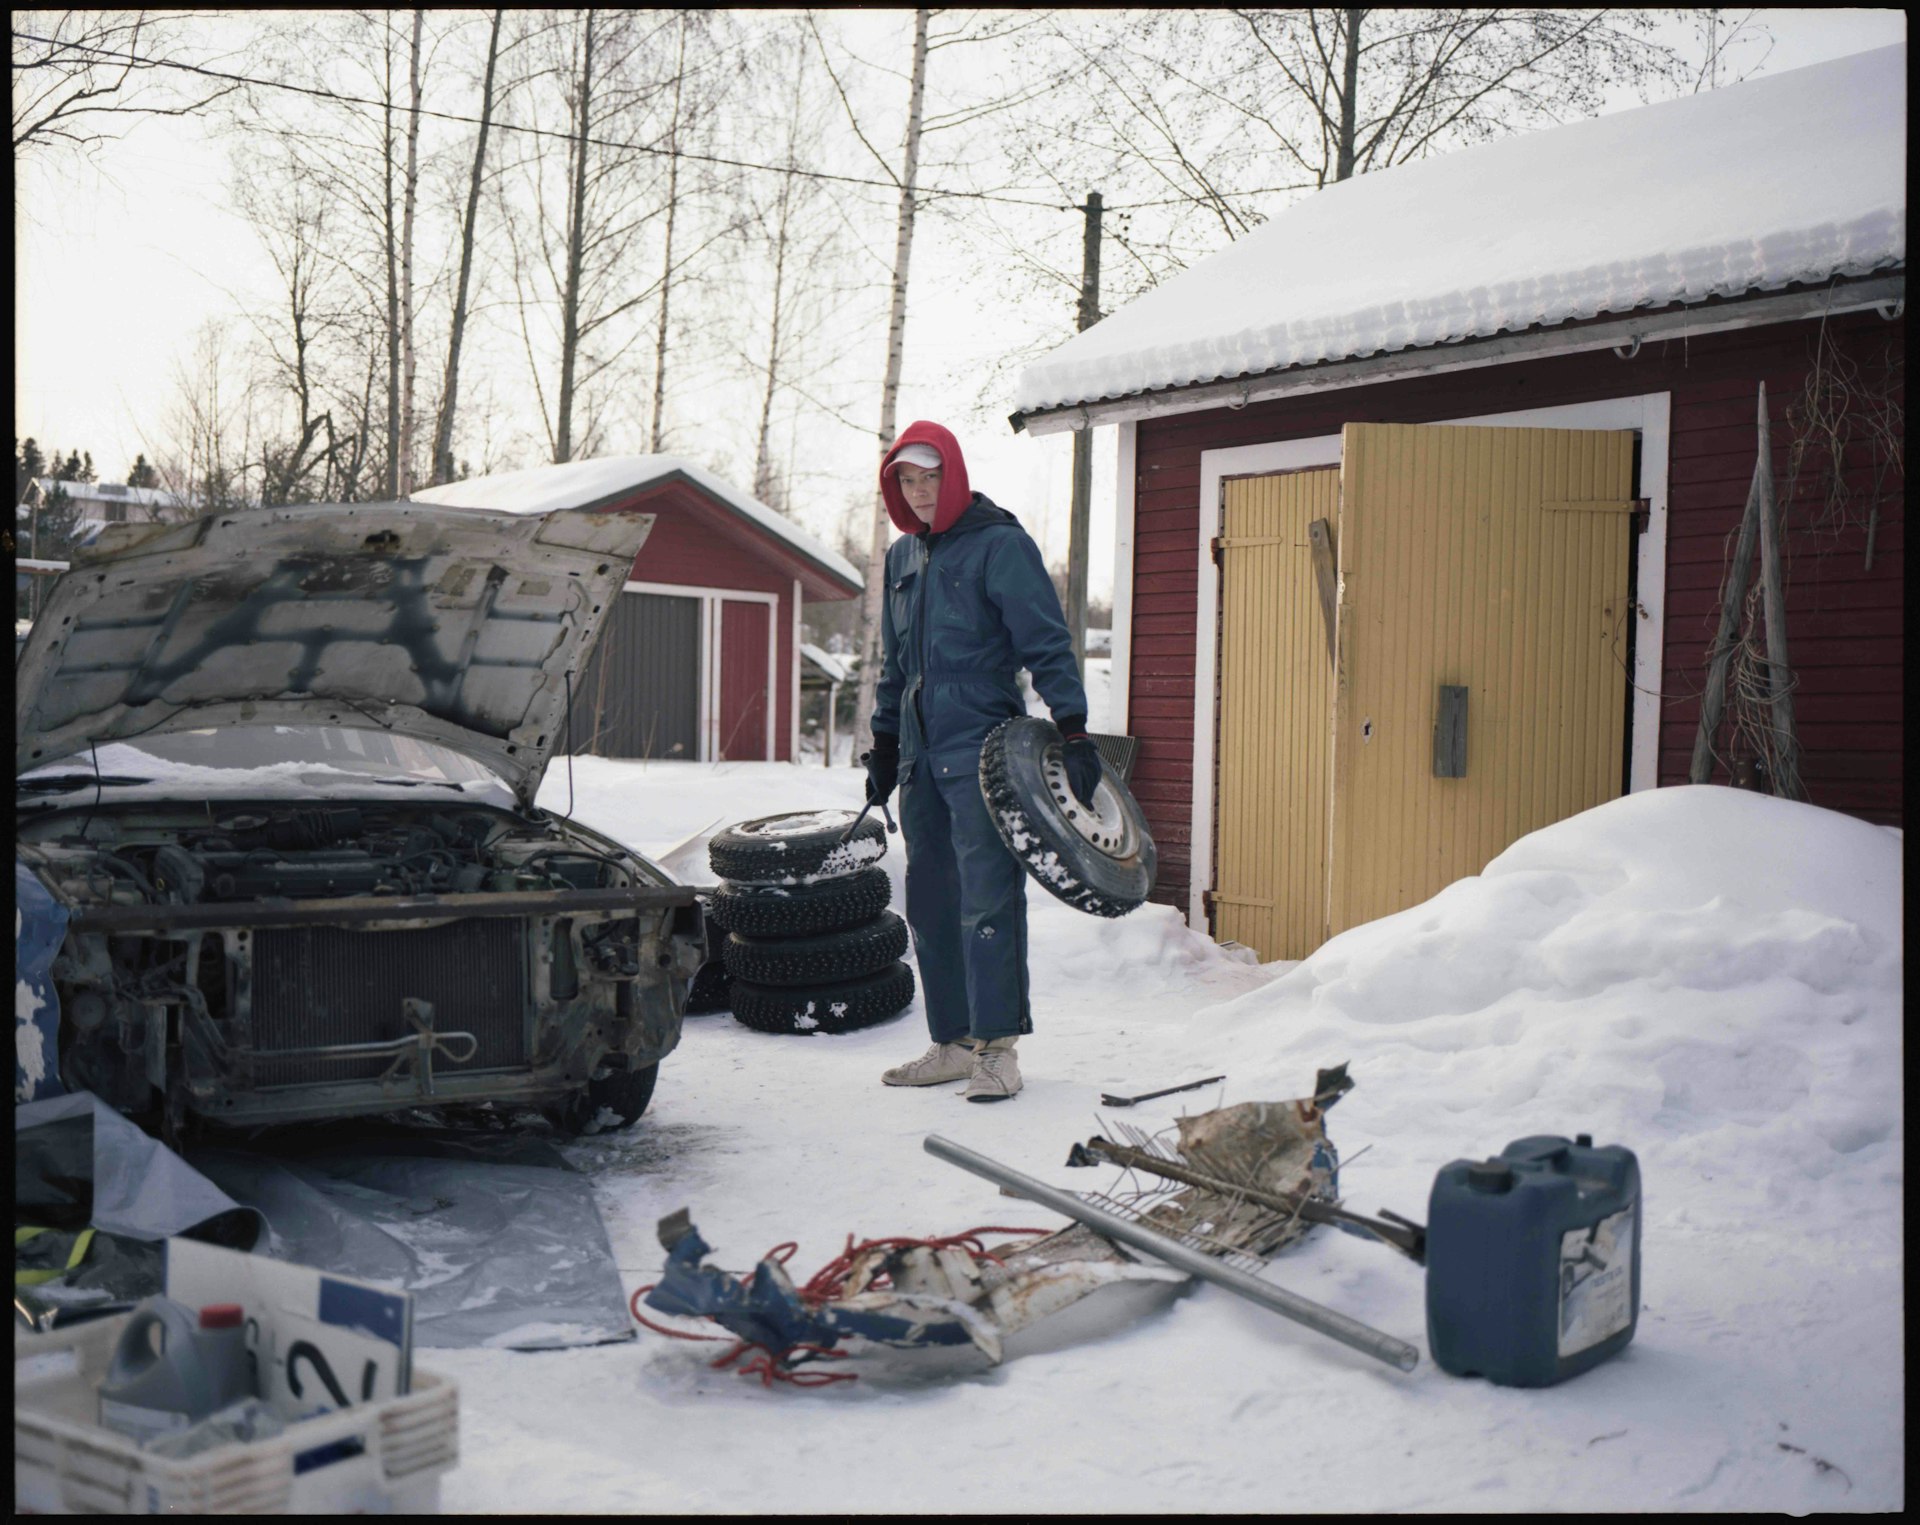 Eetu works on his car in the driveway at home.